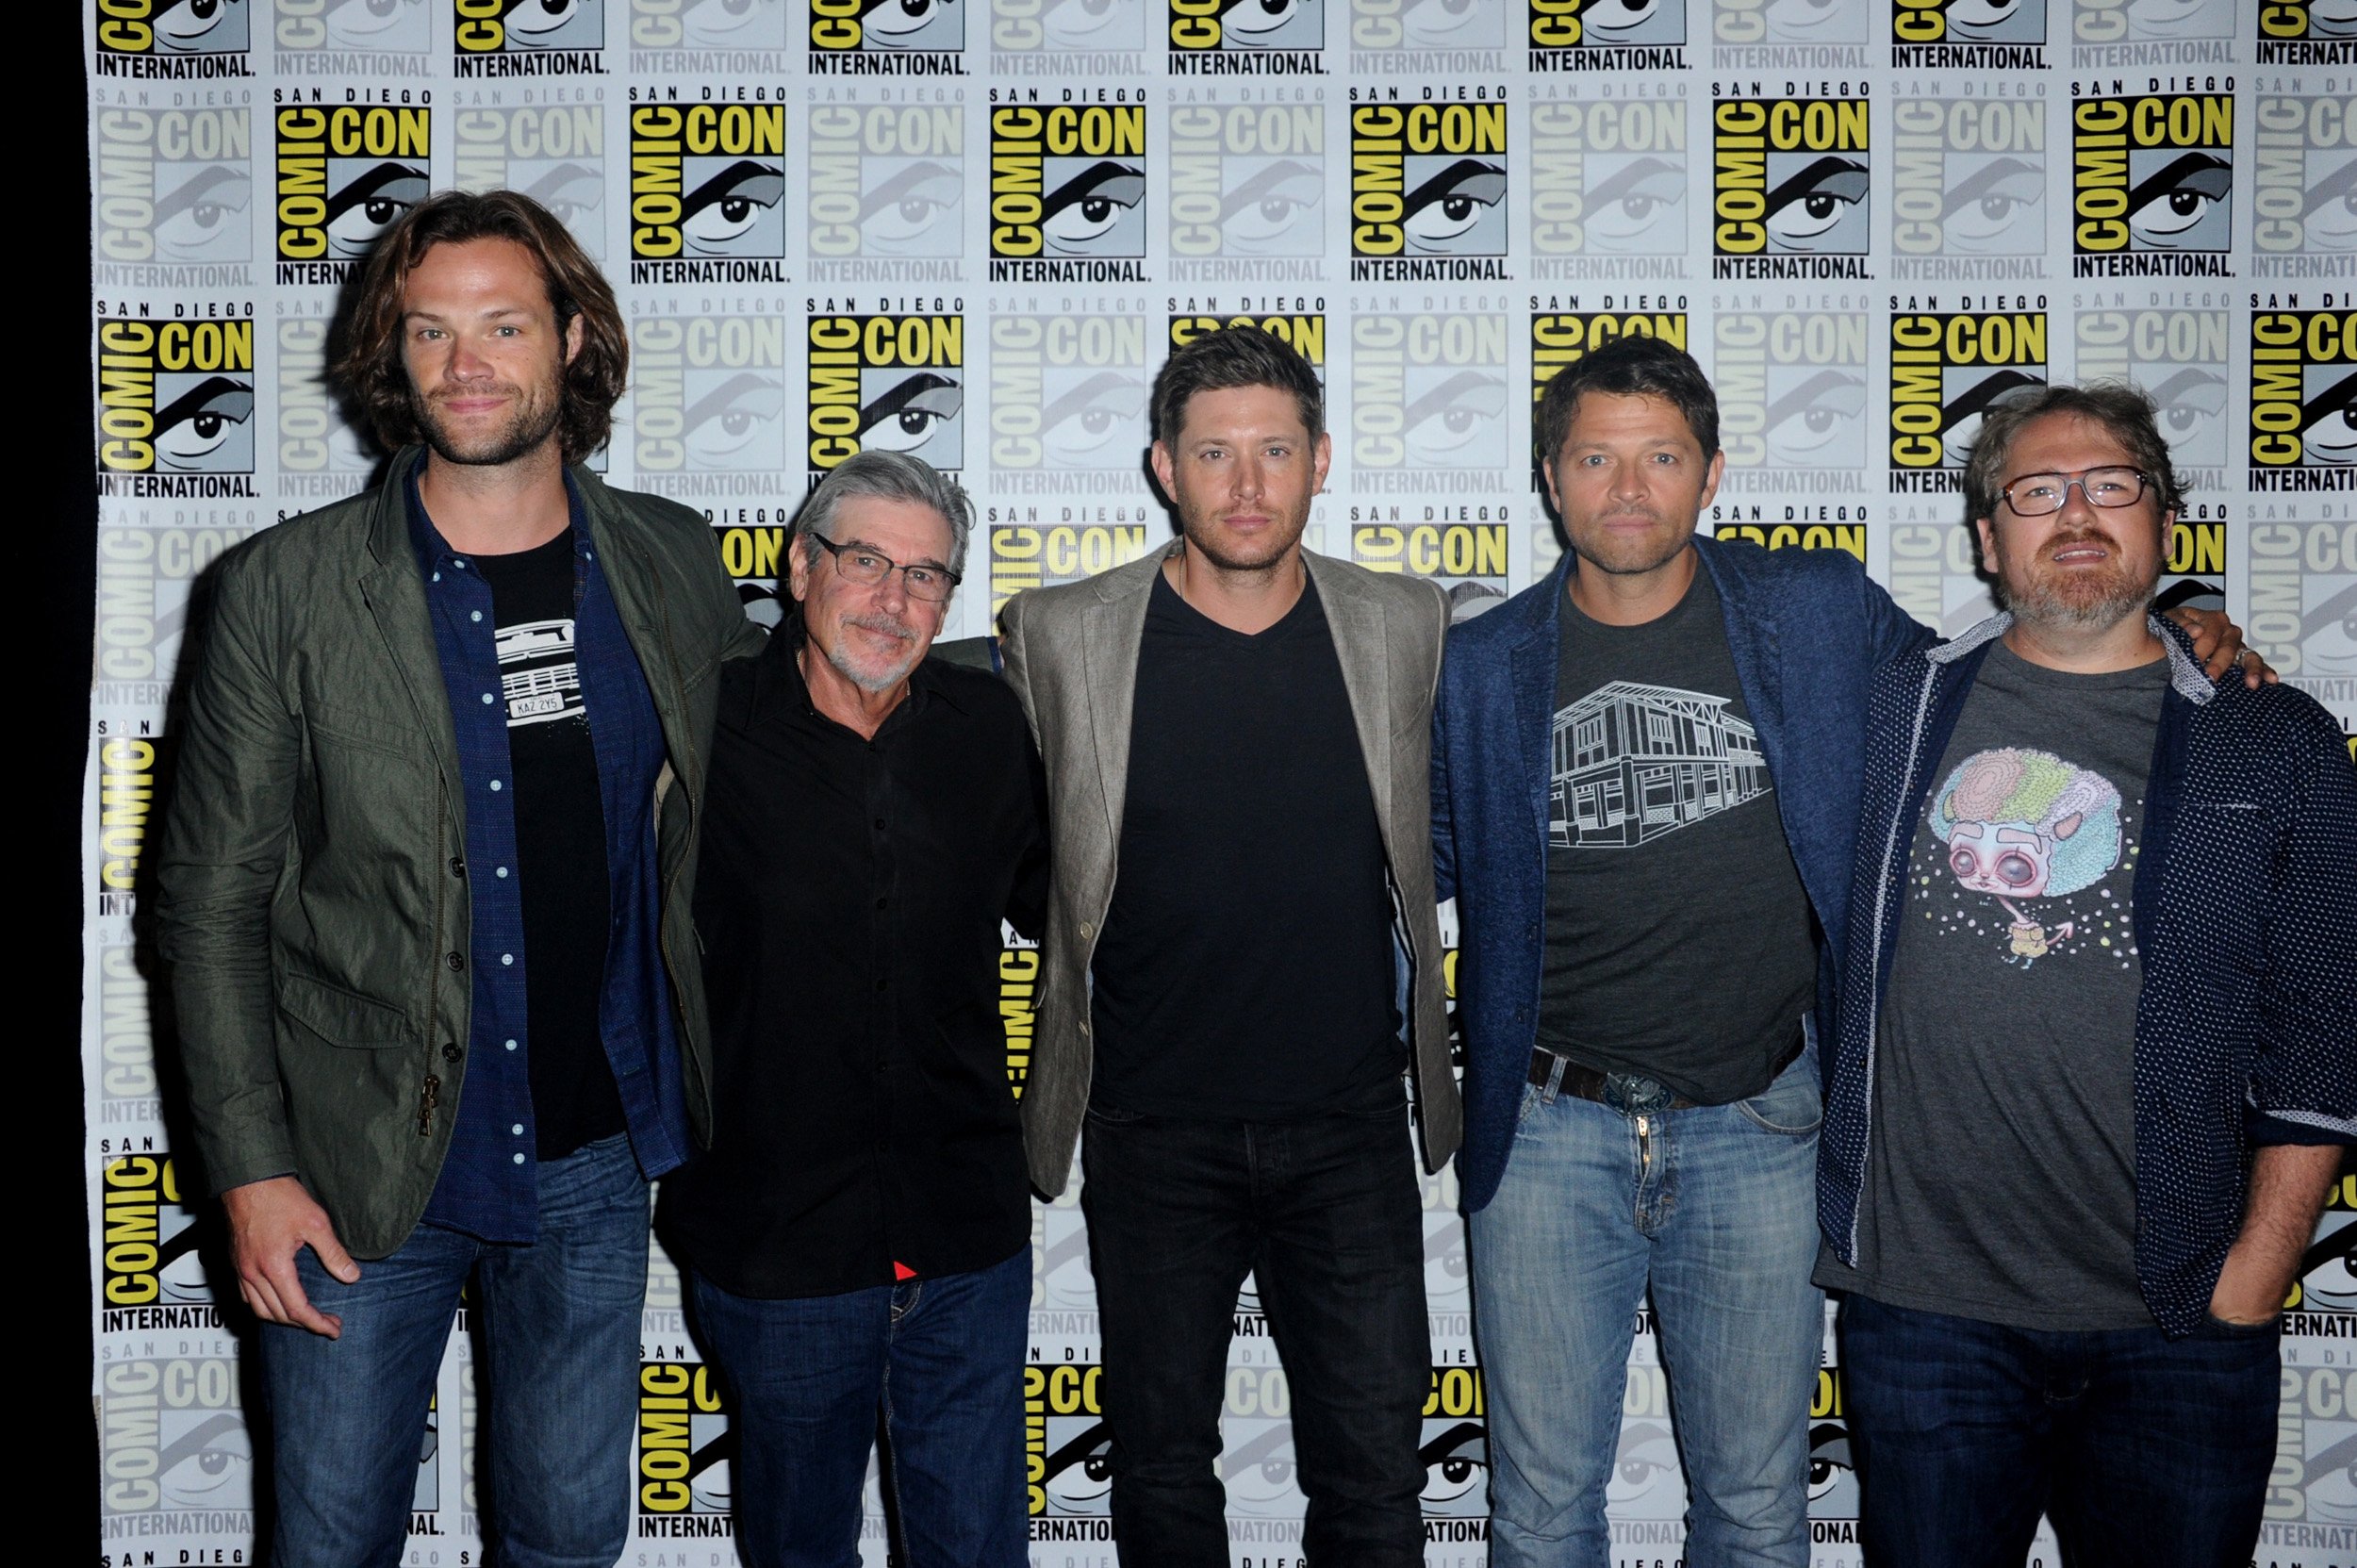 'Supernatural' stars Jared Padalecki, Jensen Ackles, and Misha Collins stand with their arms around writers and producers Robert Singer and Andrew Dabb at Comic-Con